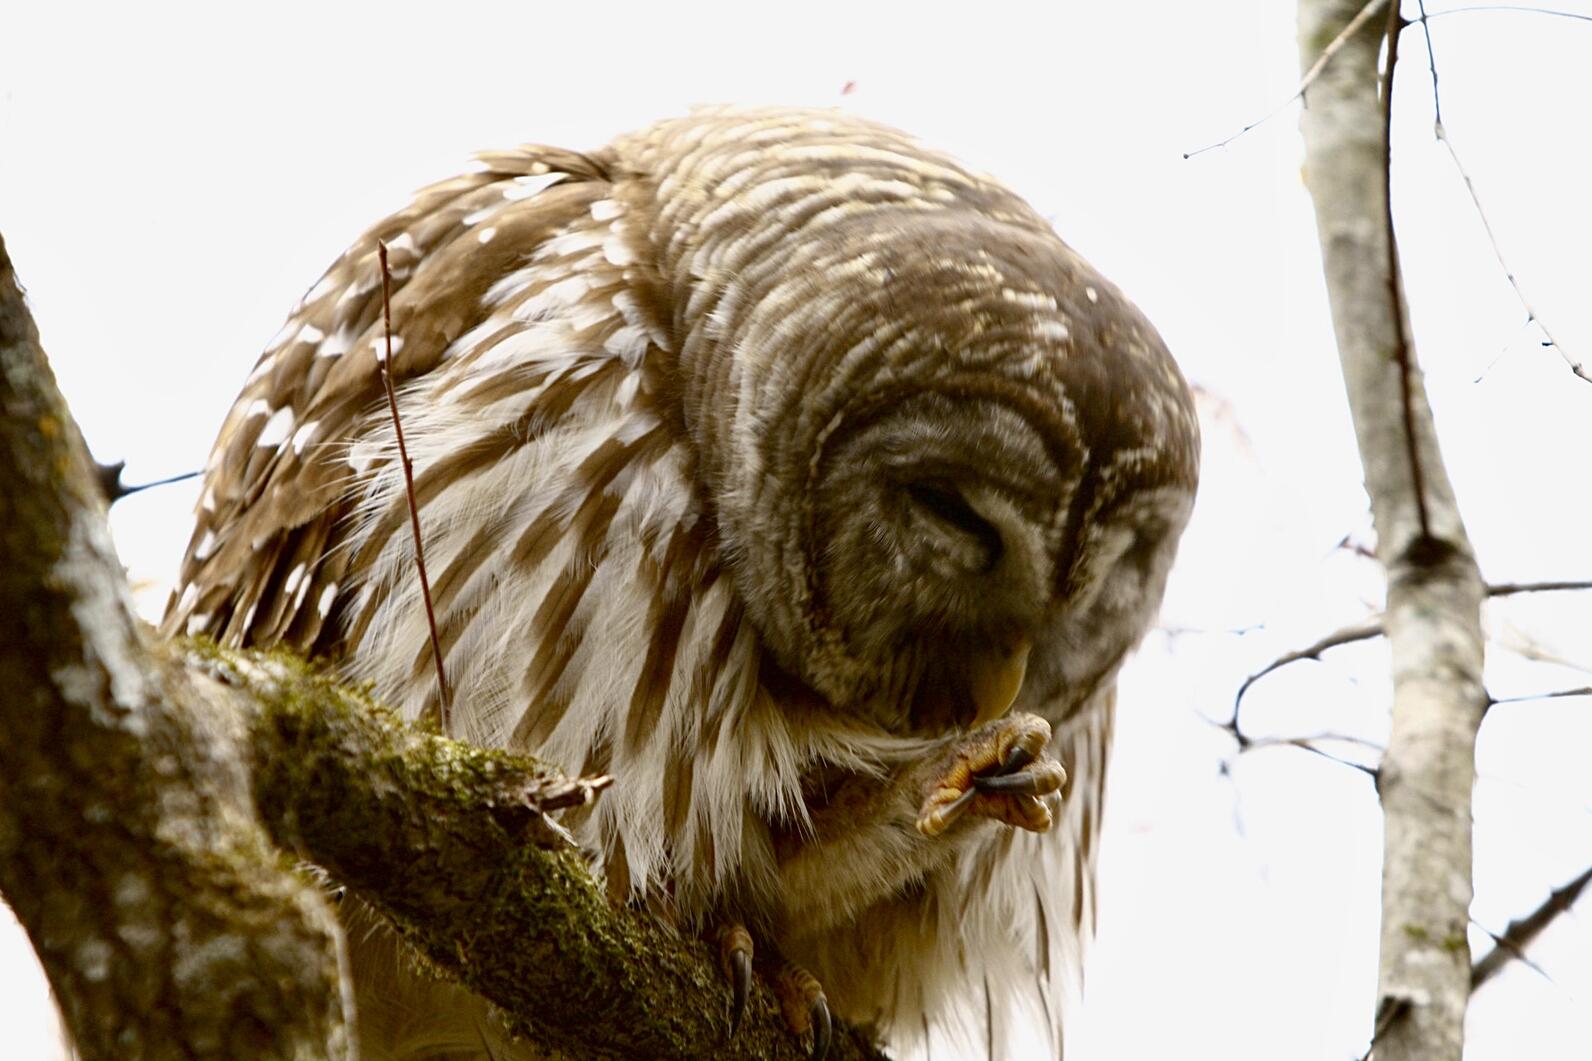 The full-bodied Barred owl is parti-striped in brown and white. The owl perches on the right foot, and cocks up the left foot with a gnarled claw. It leans its head forward to preen the left leg feathers.